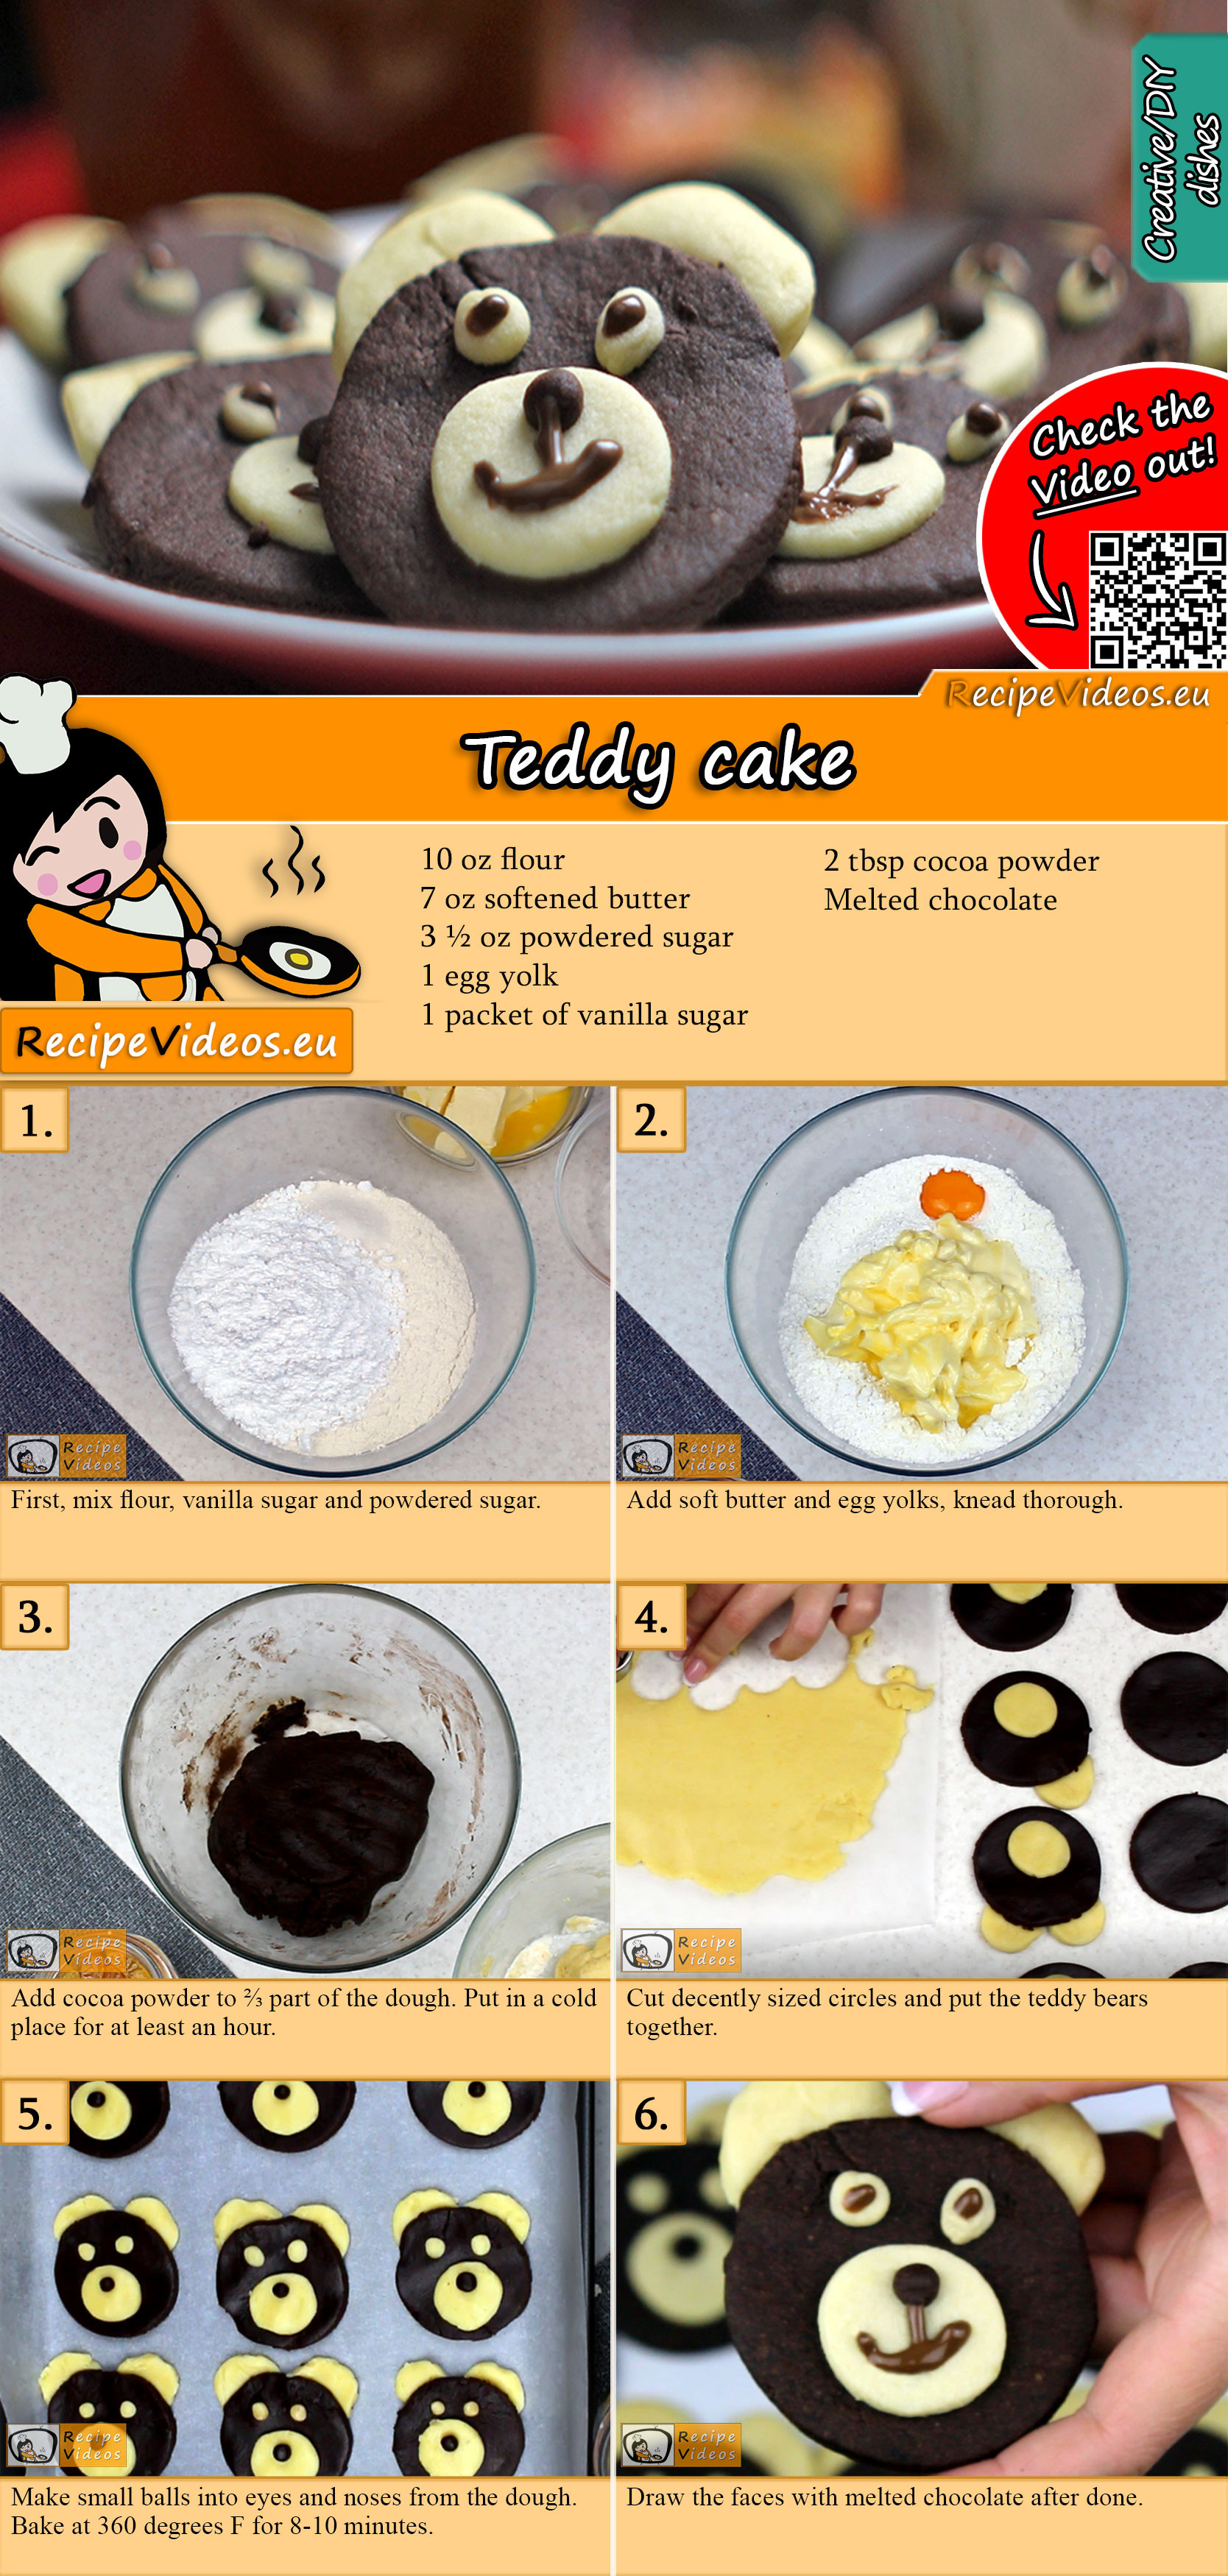 Teddy cake recipe with video